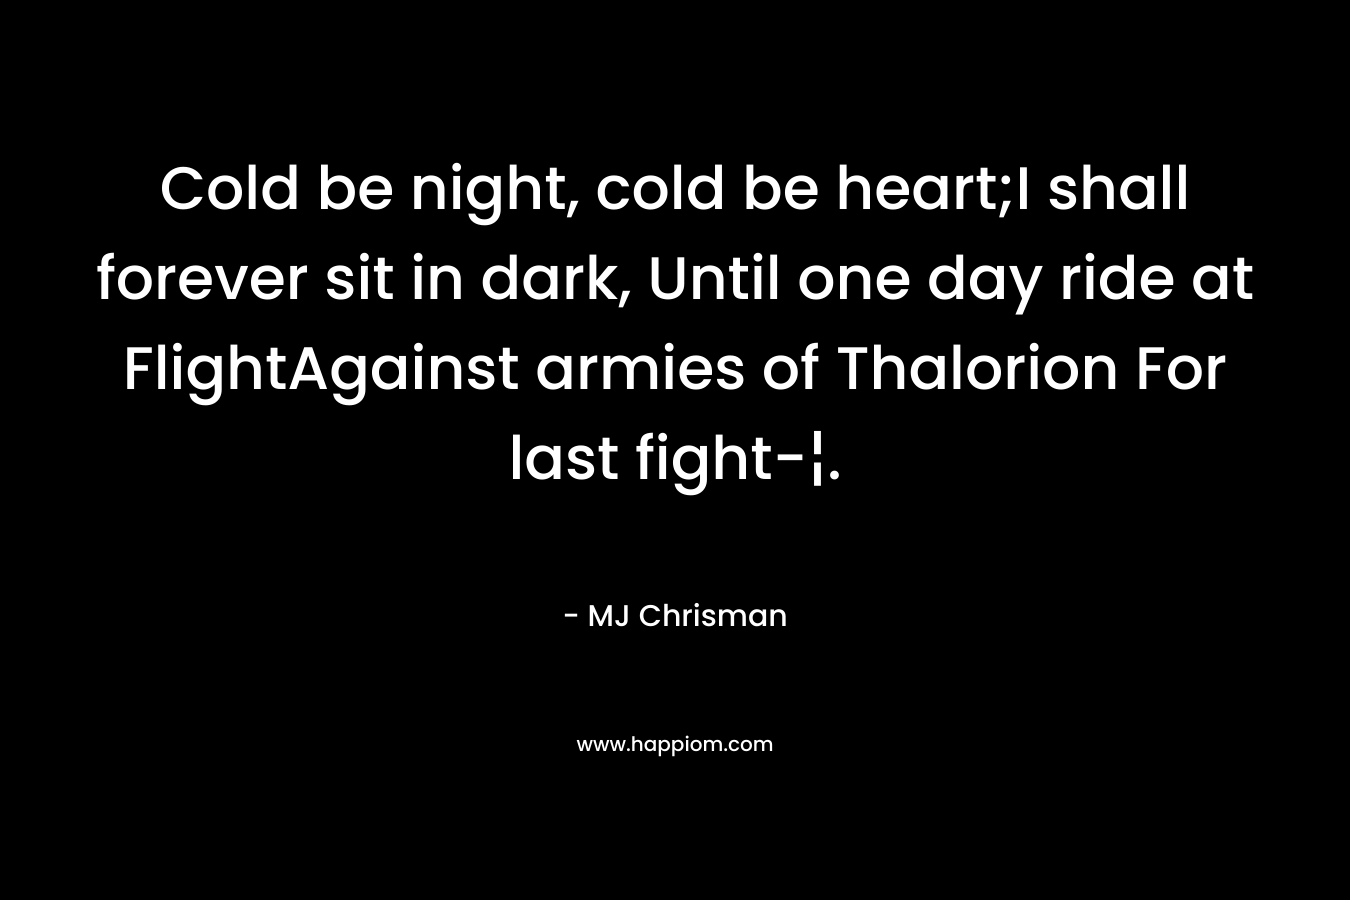 Cold be night, cold be heart;I shall forever sit in dark, Until one day ride at FlightAgainst armies of Thalorion For last fight-¦. – MJ Chrisman